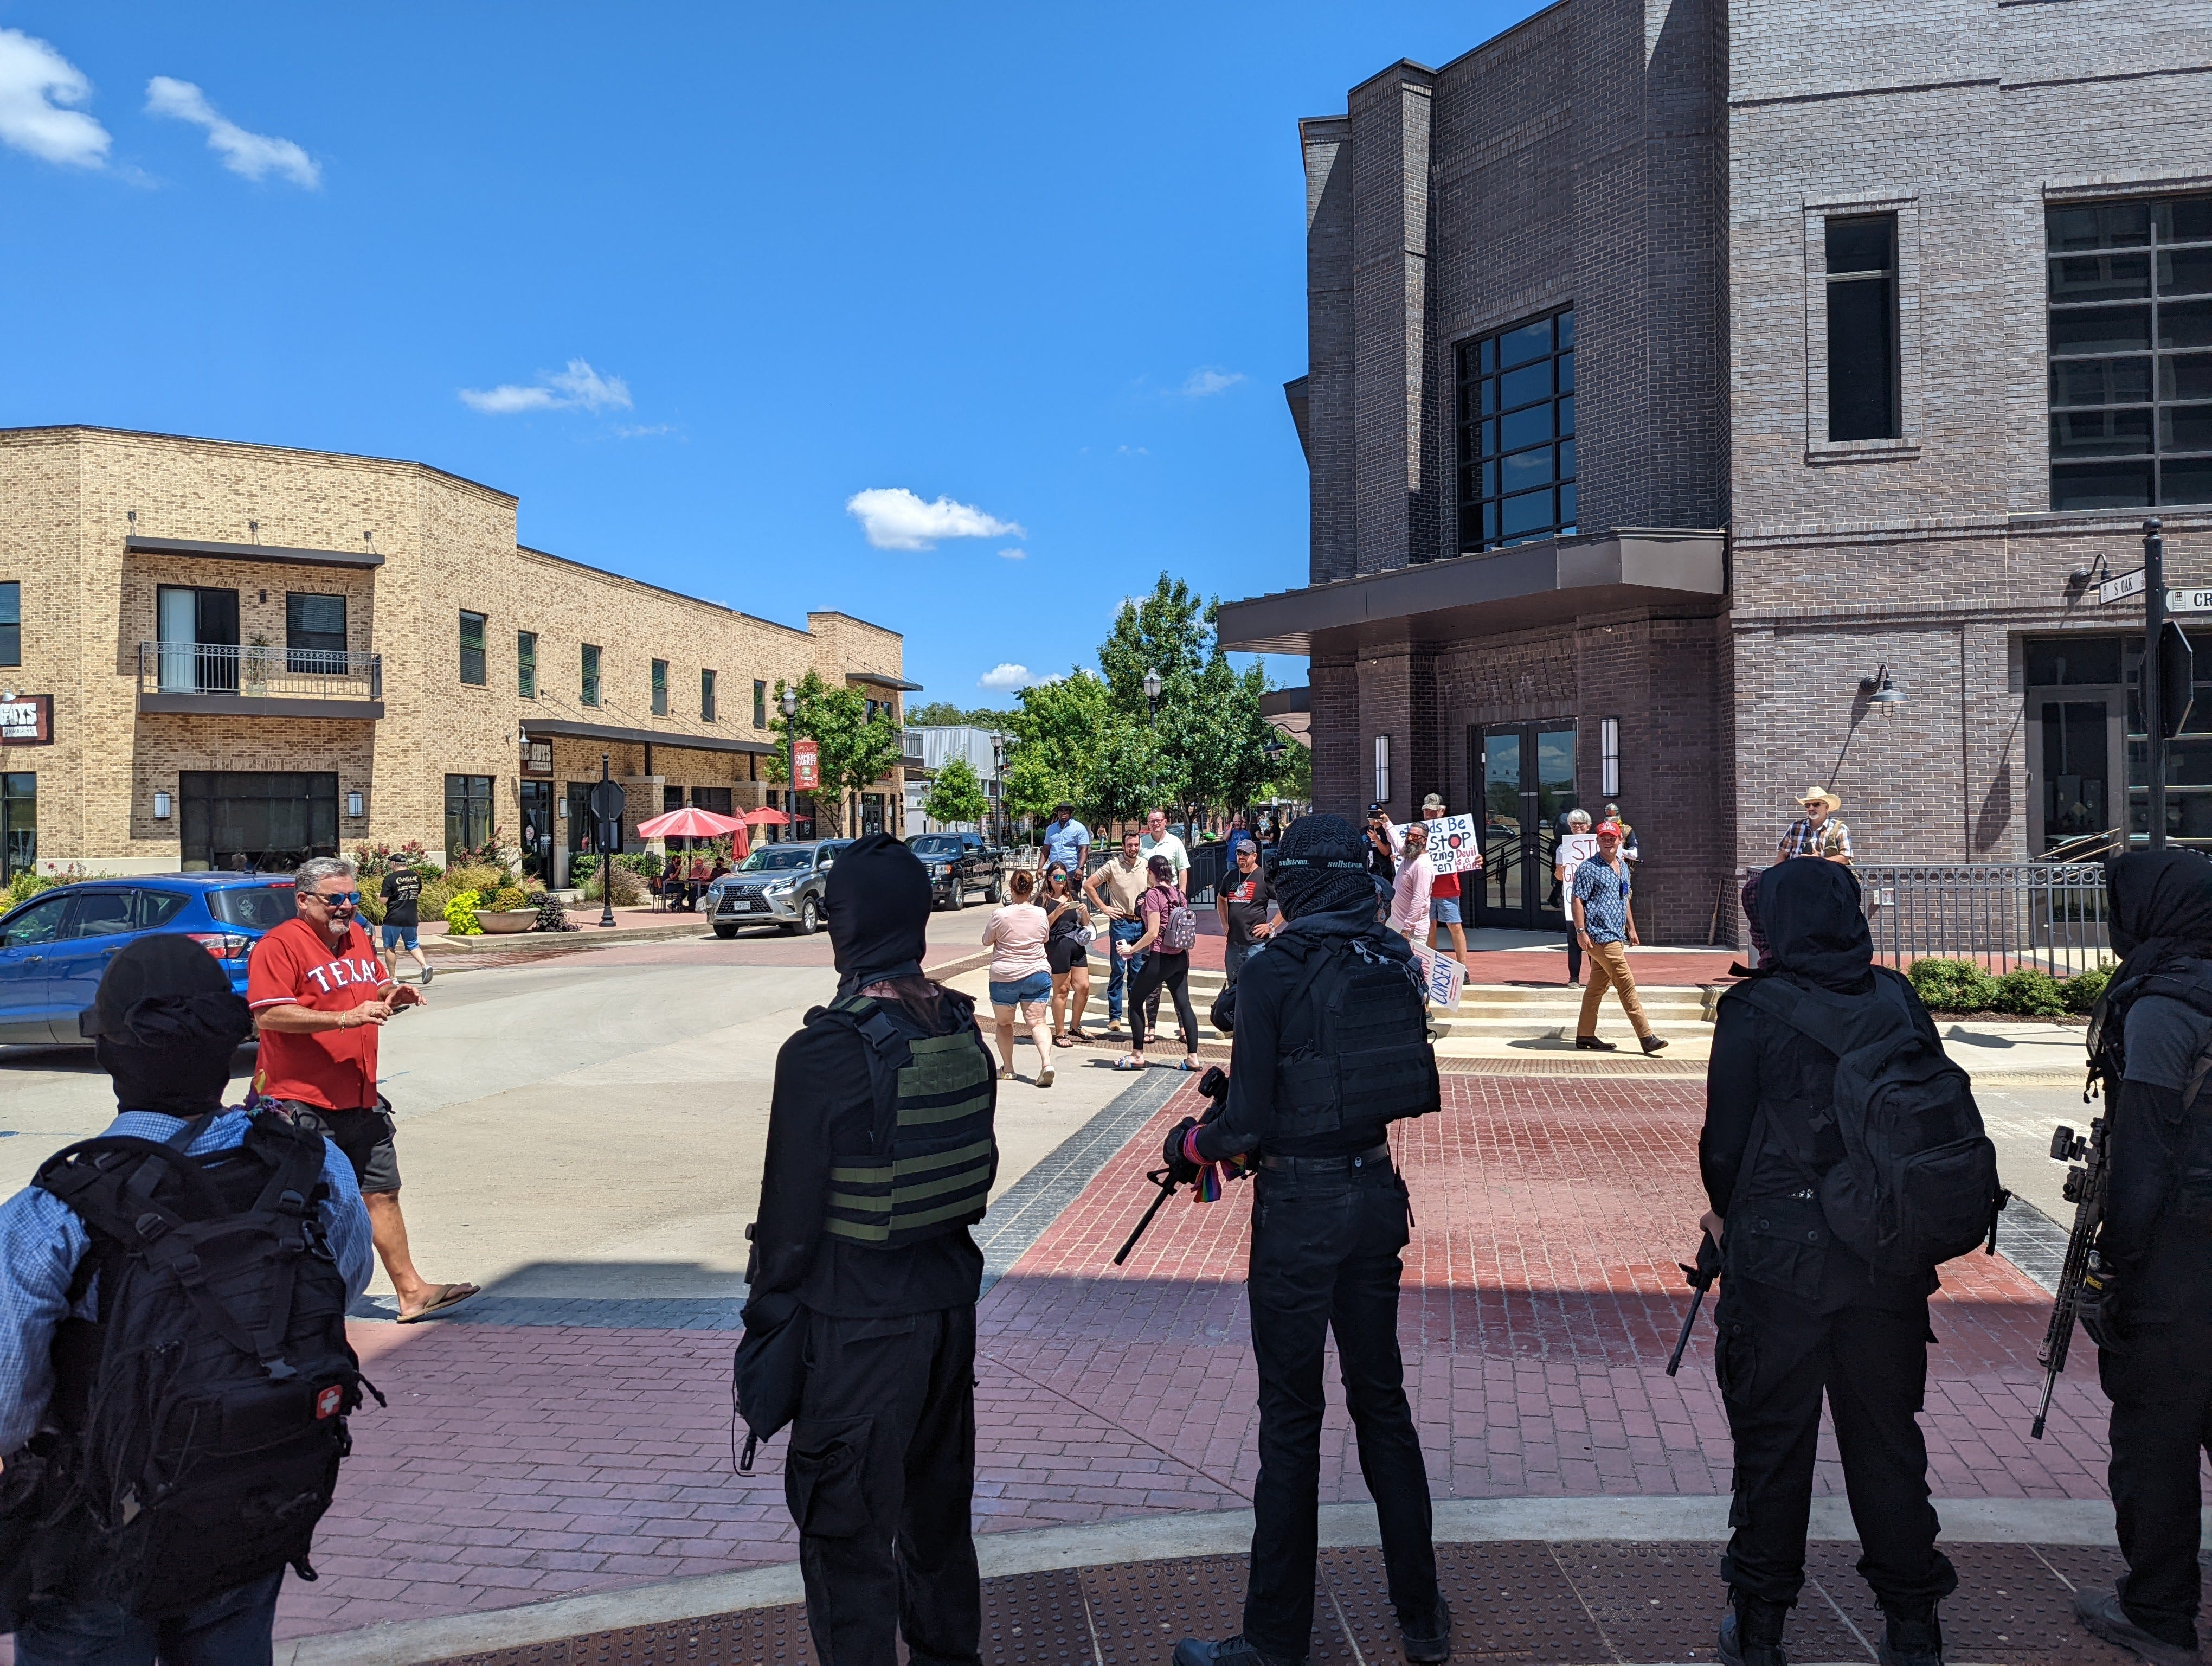 Members of the Elm Fork John Brown Gun Club arrived at the drag brunch carrying semiautomatic rifles. Some also wore pride flags. When protesters approached the show, the gun club directed them to stay back, according to videos from the day.